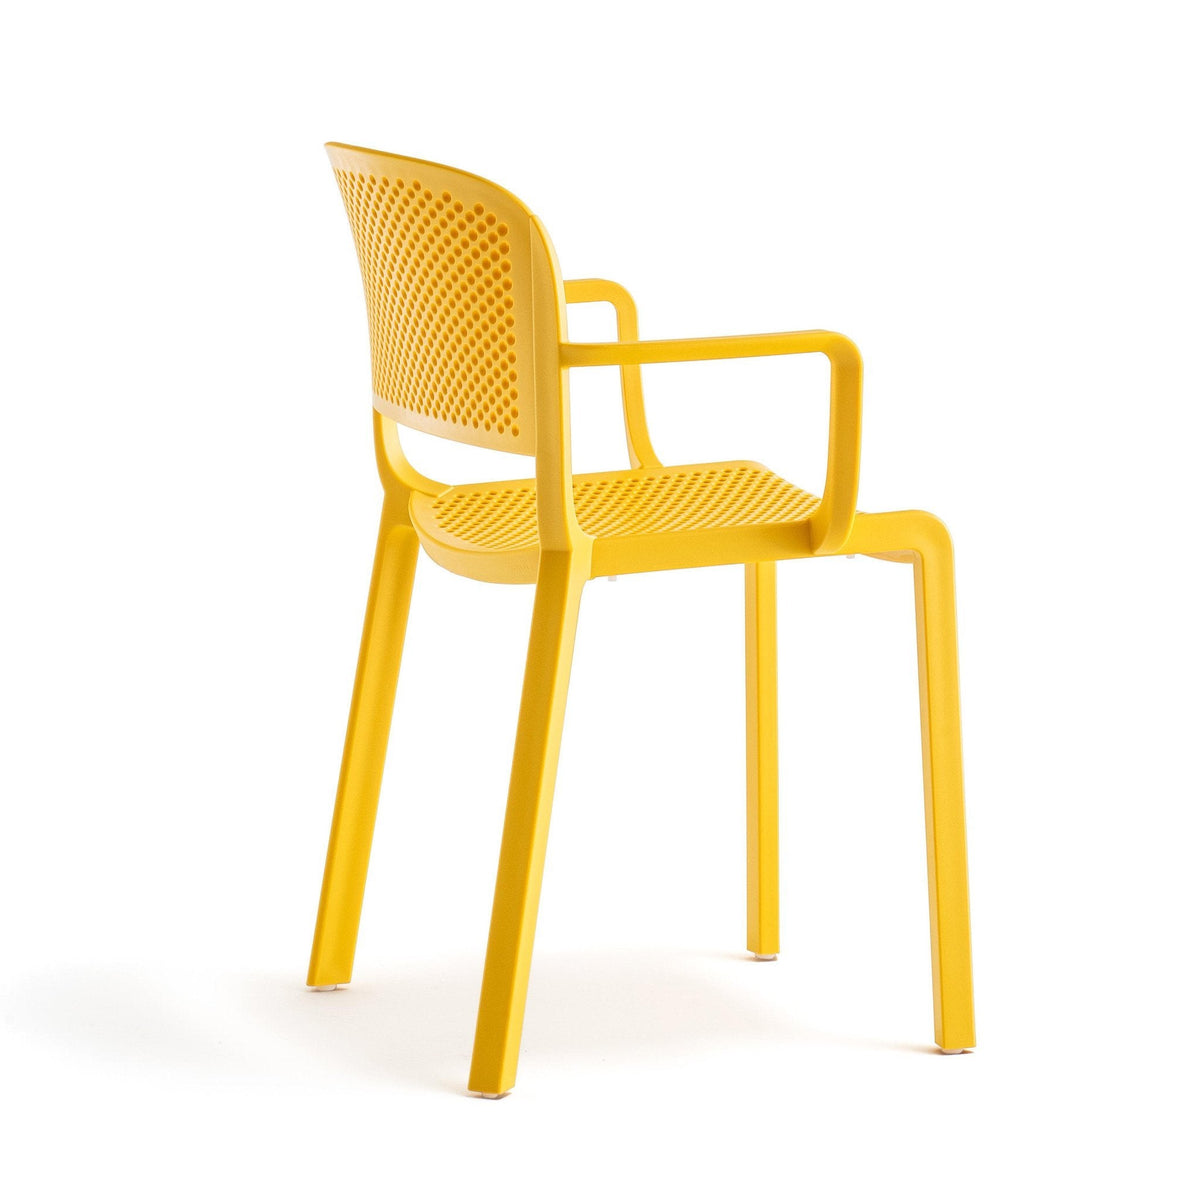 Dome Perforated Armchair-Pedrali-Contract Furniture Store